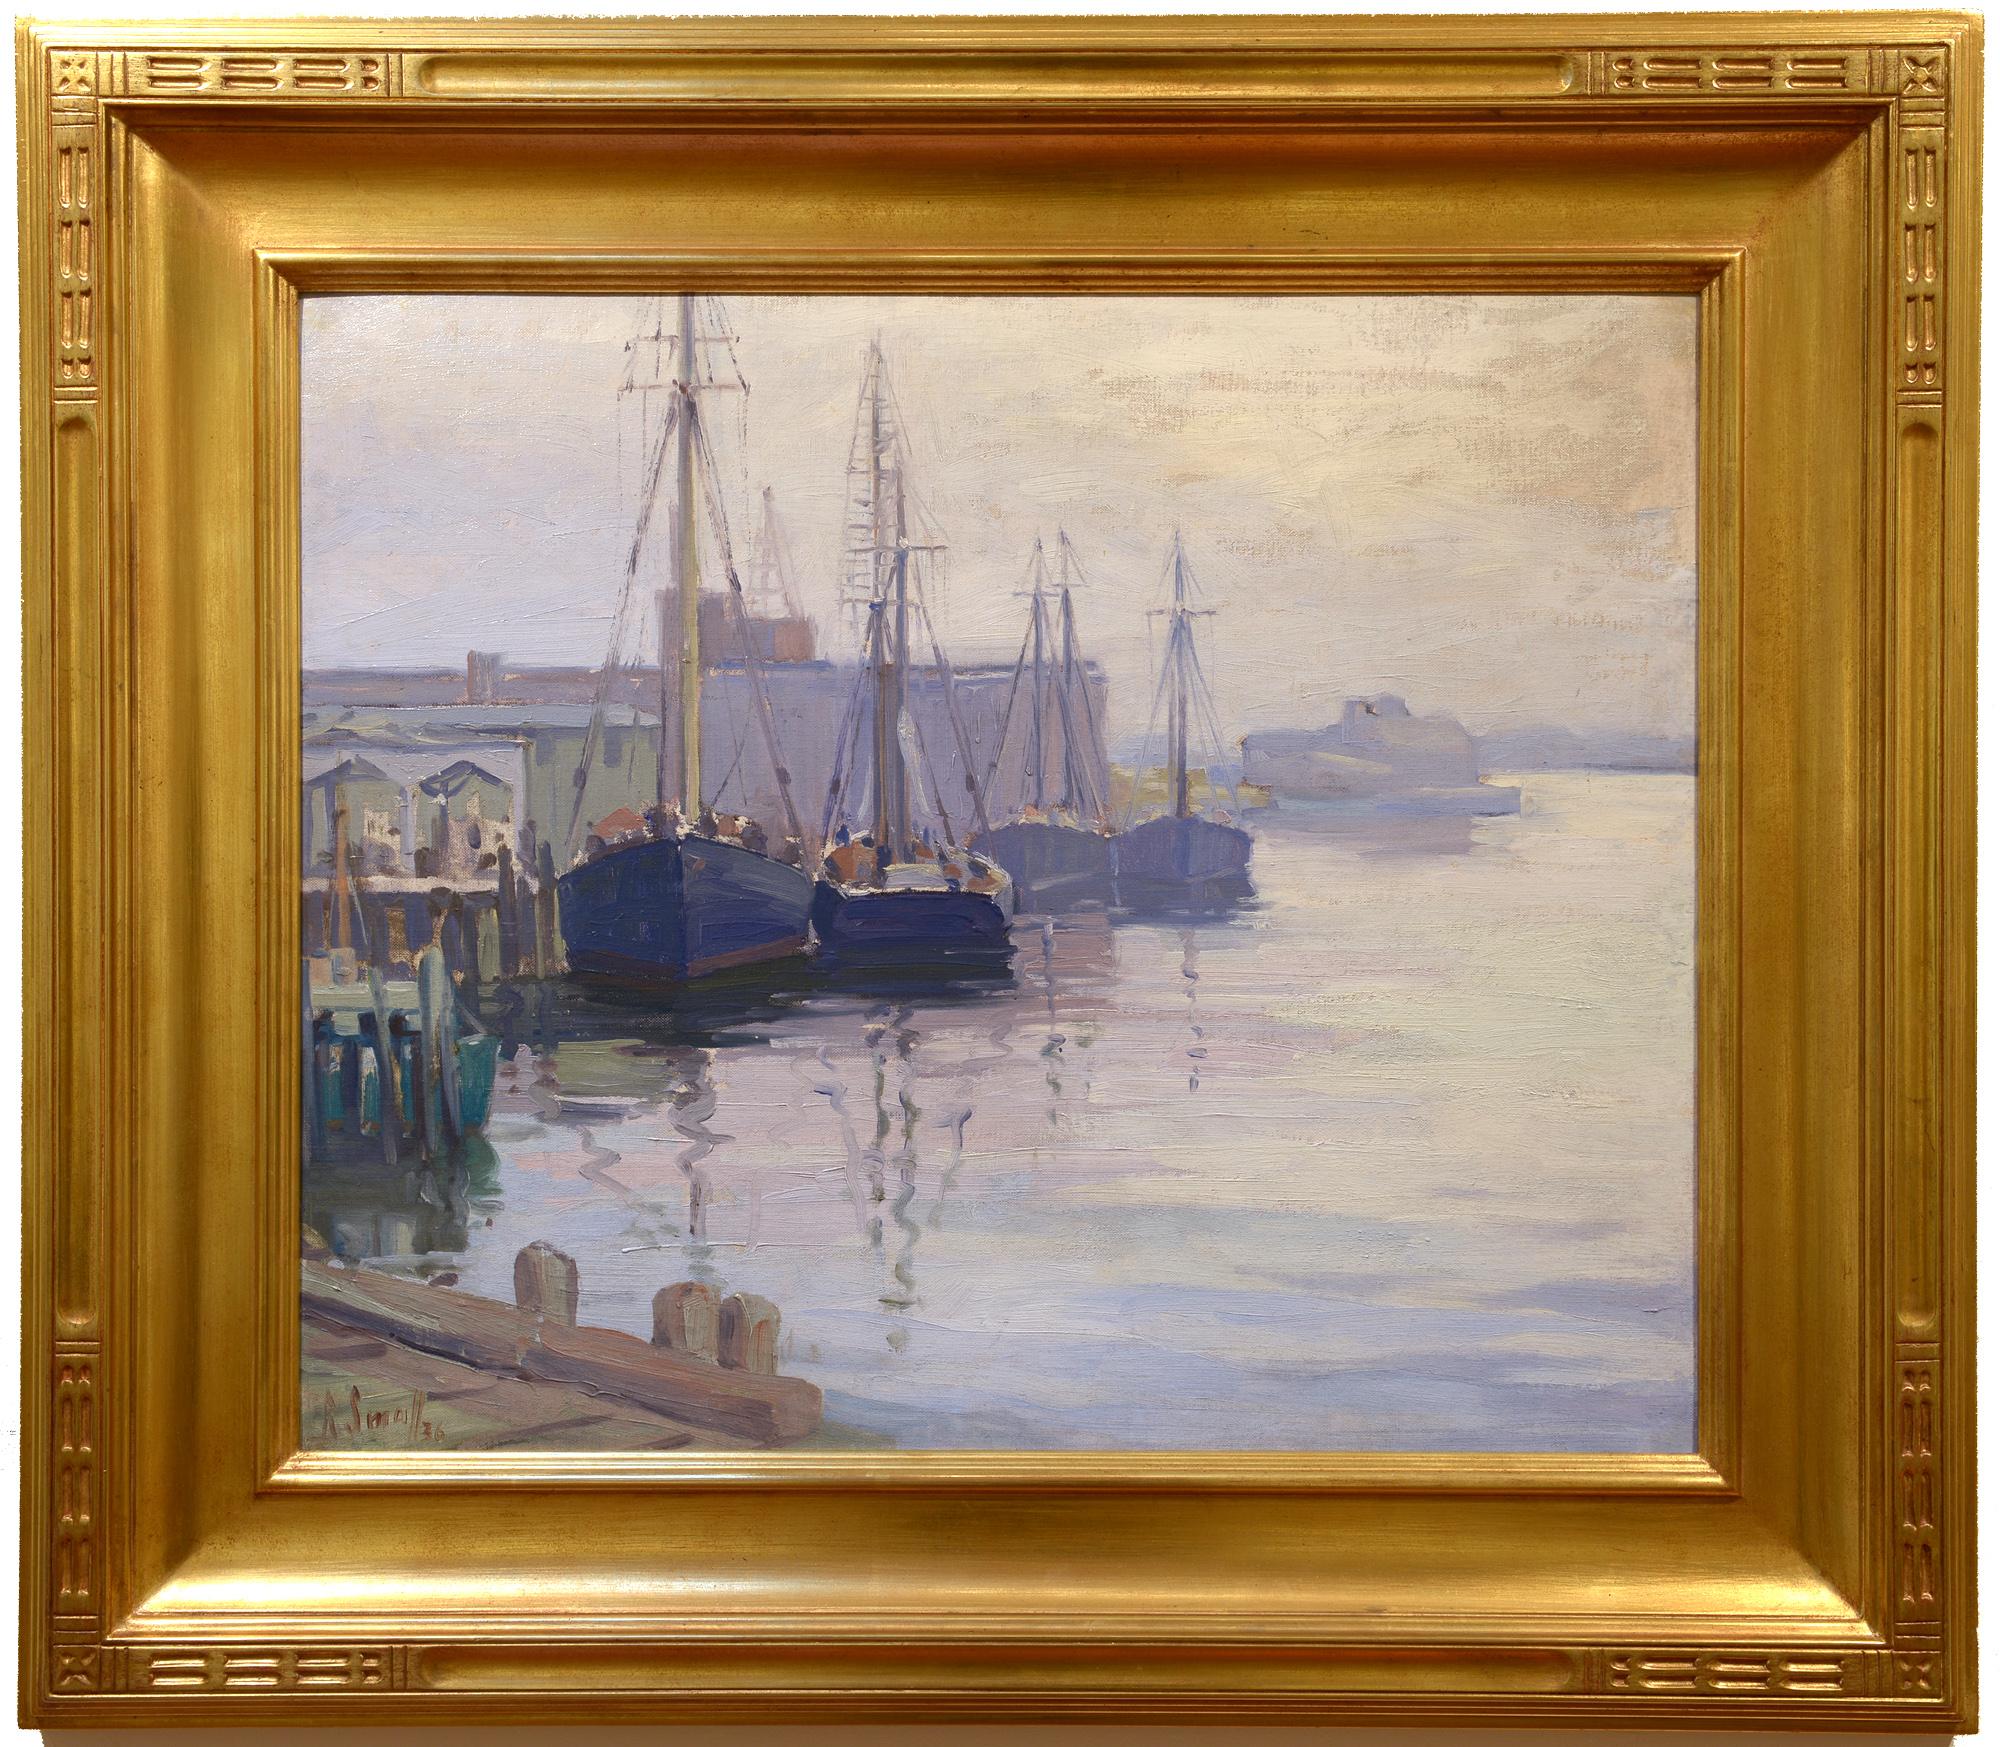 Silvery Day, Boats at Wharf, New England Harbor, Impressionist Oil - Painting by Rena Small